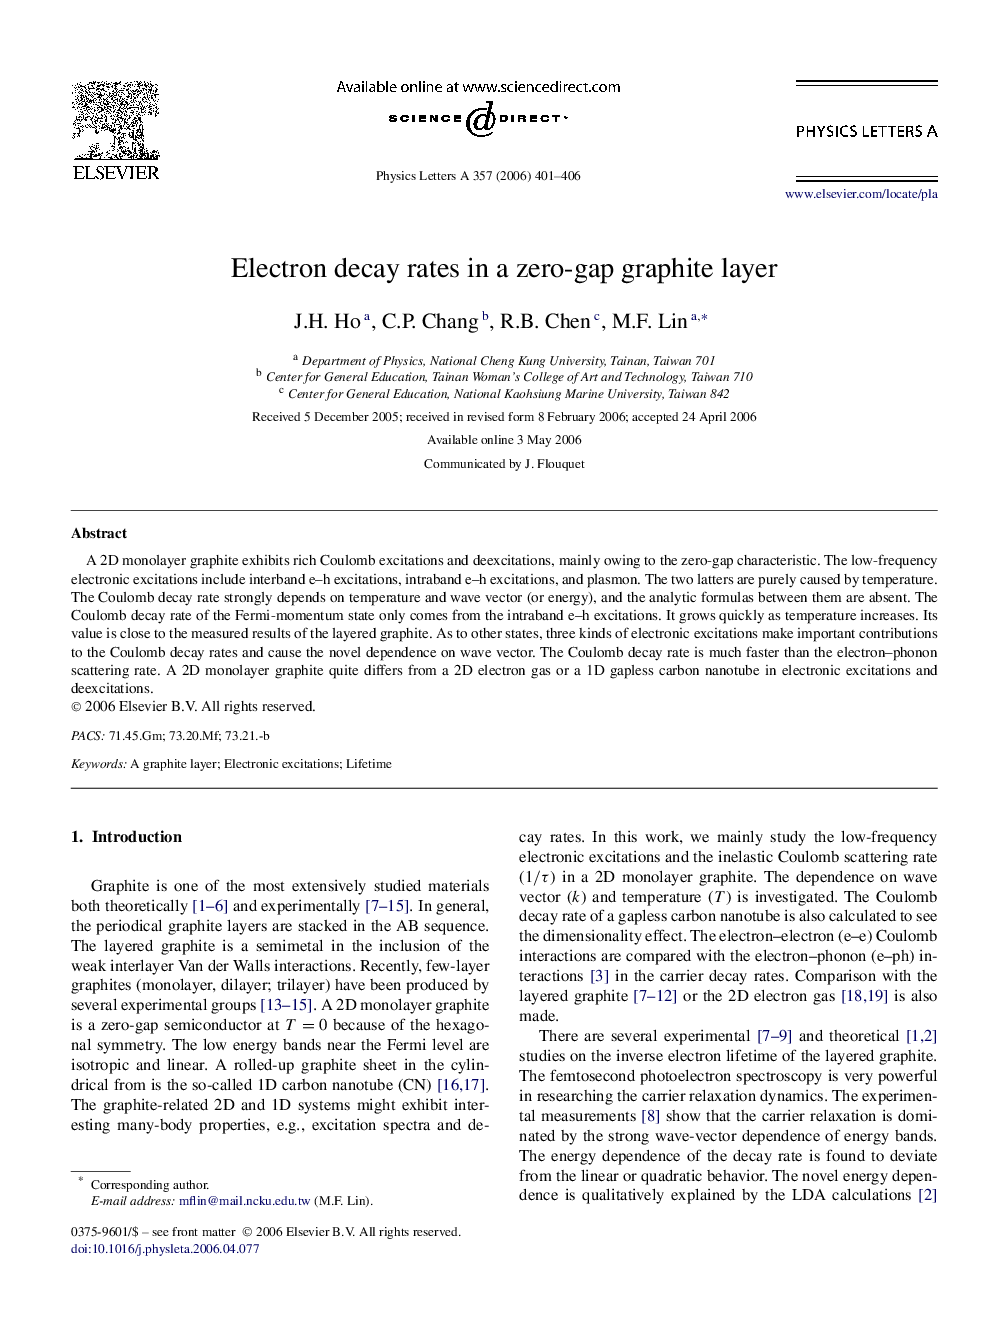 Electron decay rates in a zero-gap graphite layer